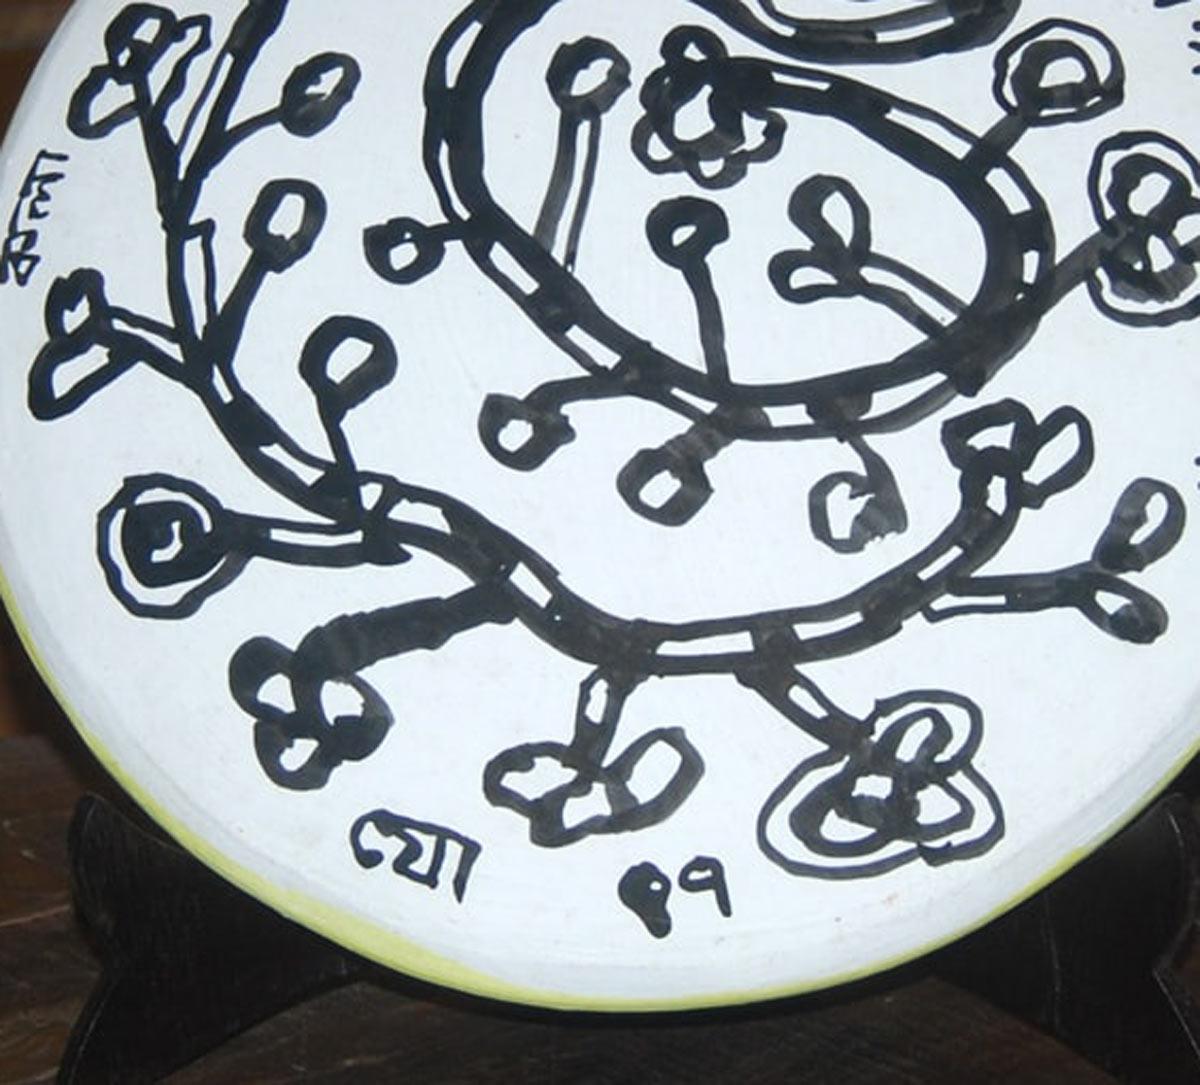 Jogen Chowdhury - Untitled - 12 diameter 
Teracotta. Signed in bengali.

Always a powerful artist, Chowdhury developed his individual style after his return from France in the late '60s. Although Chowdhury has painted oils, his forte is painting in